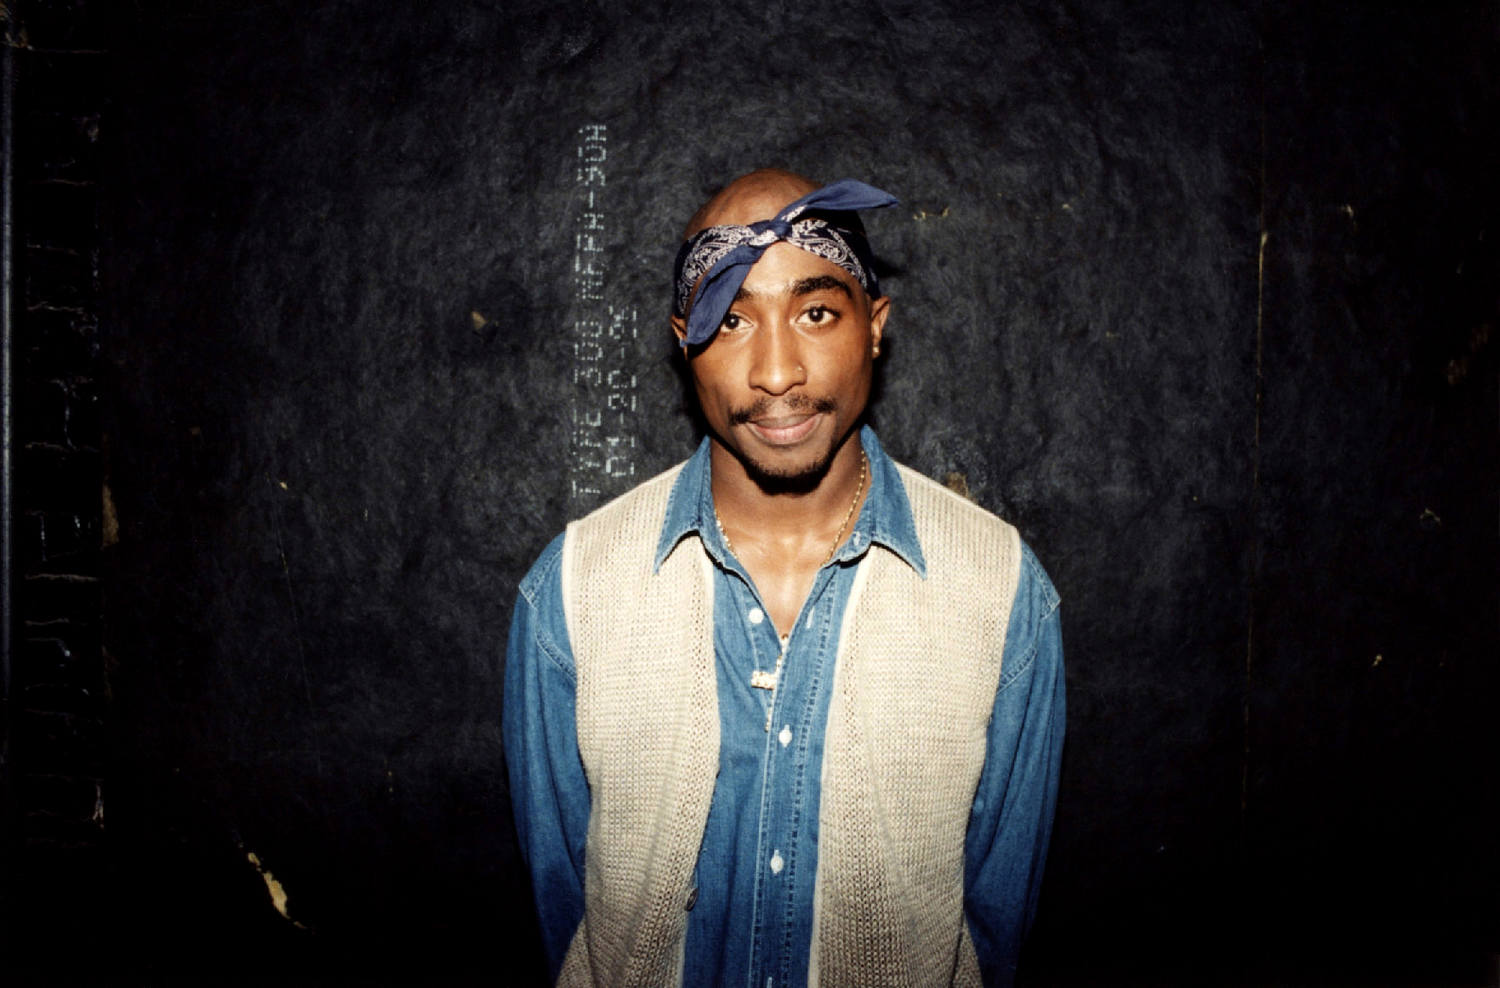 Las Vegas police arrest person in connection with Tupac Shakur murder investigation